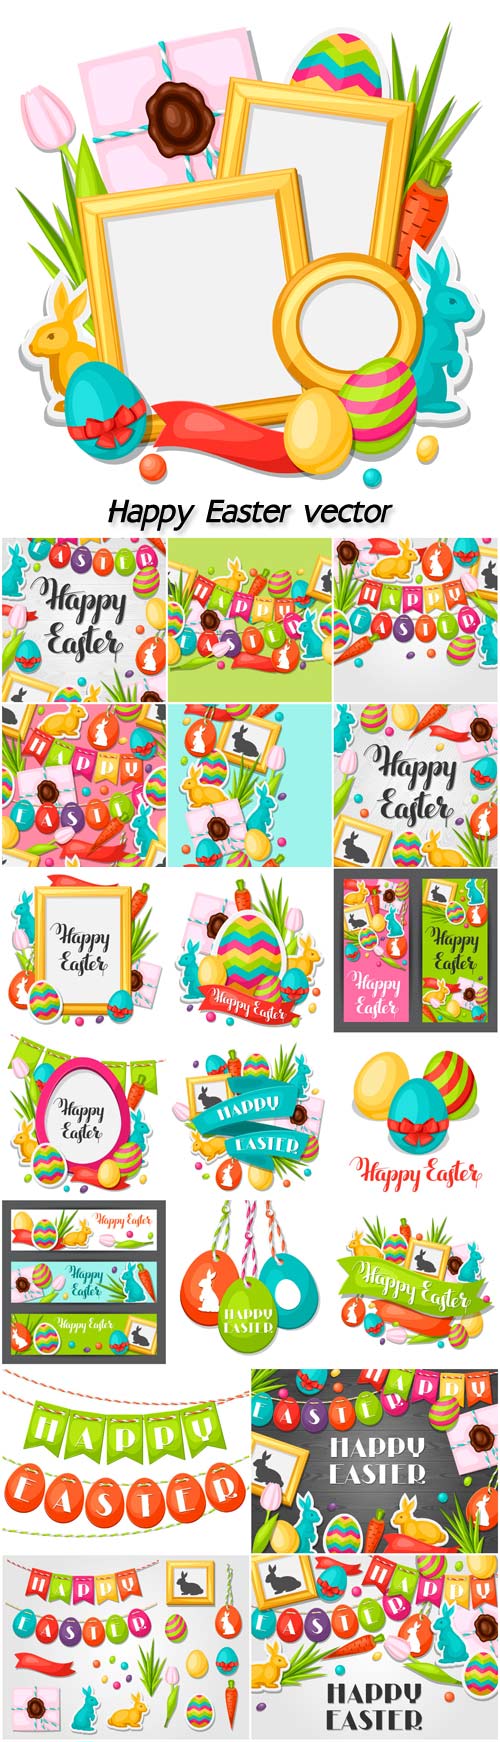 Happy Easter photo frame with decorative objects, eggs, bunnies stickers